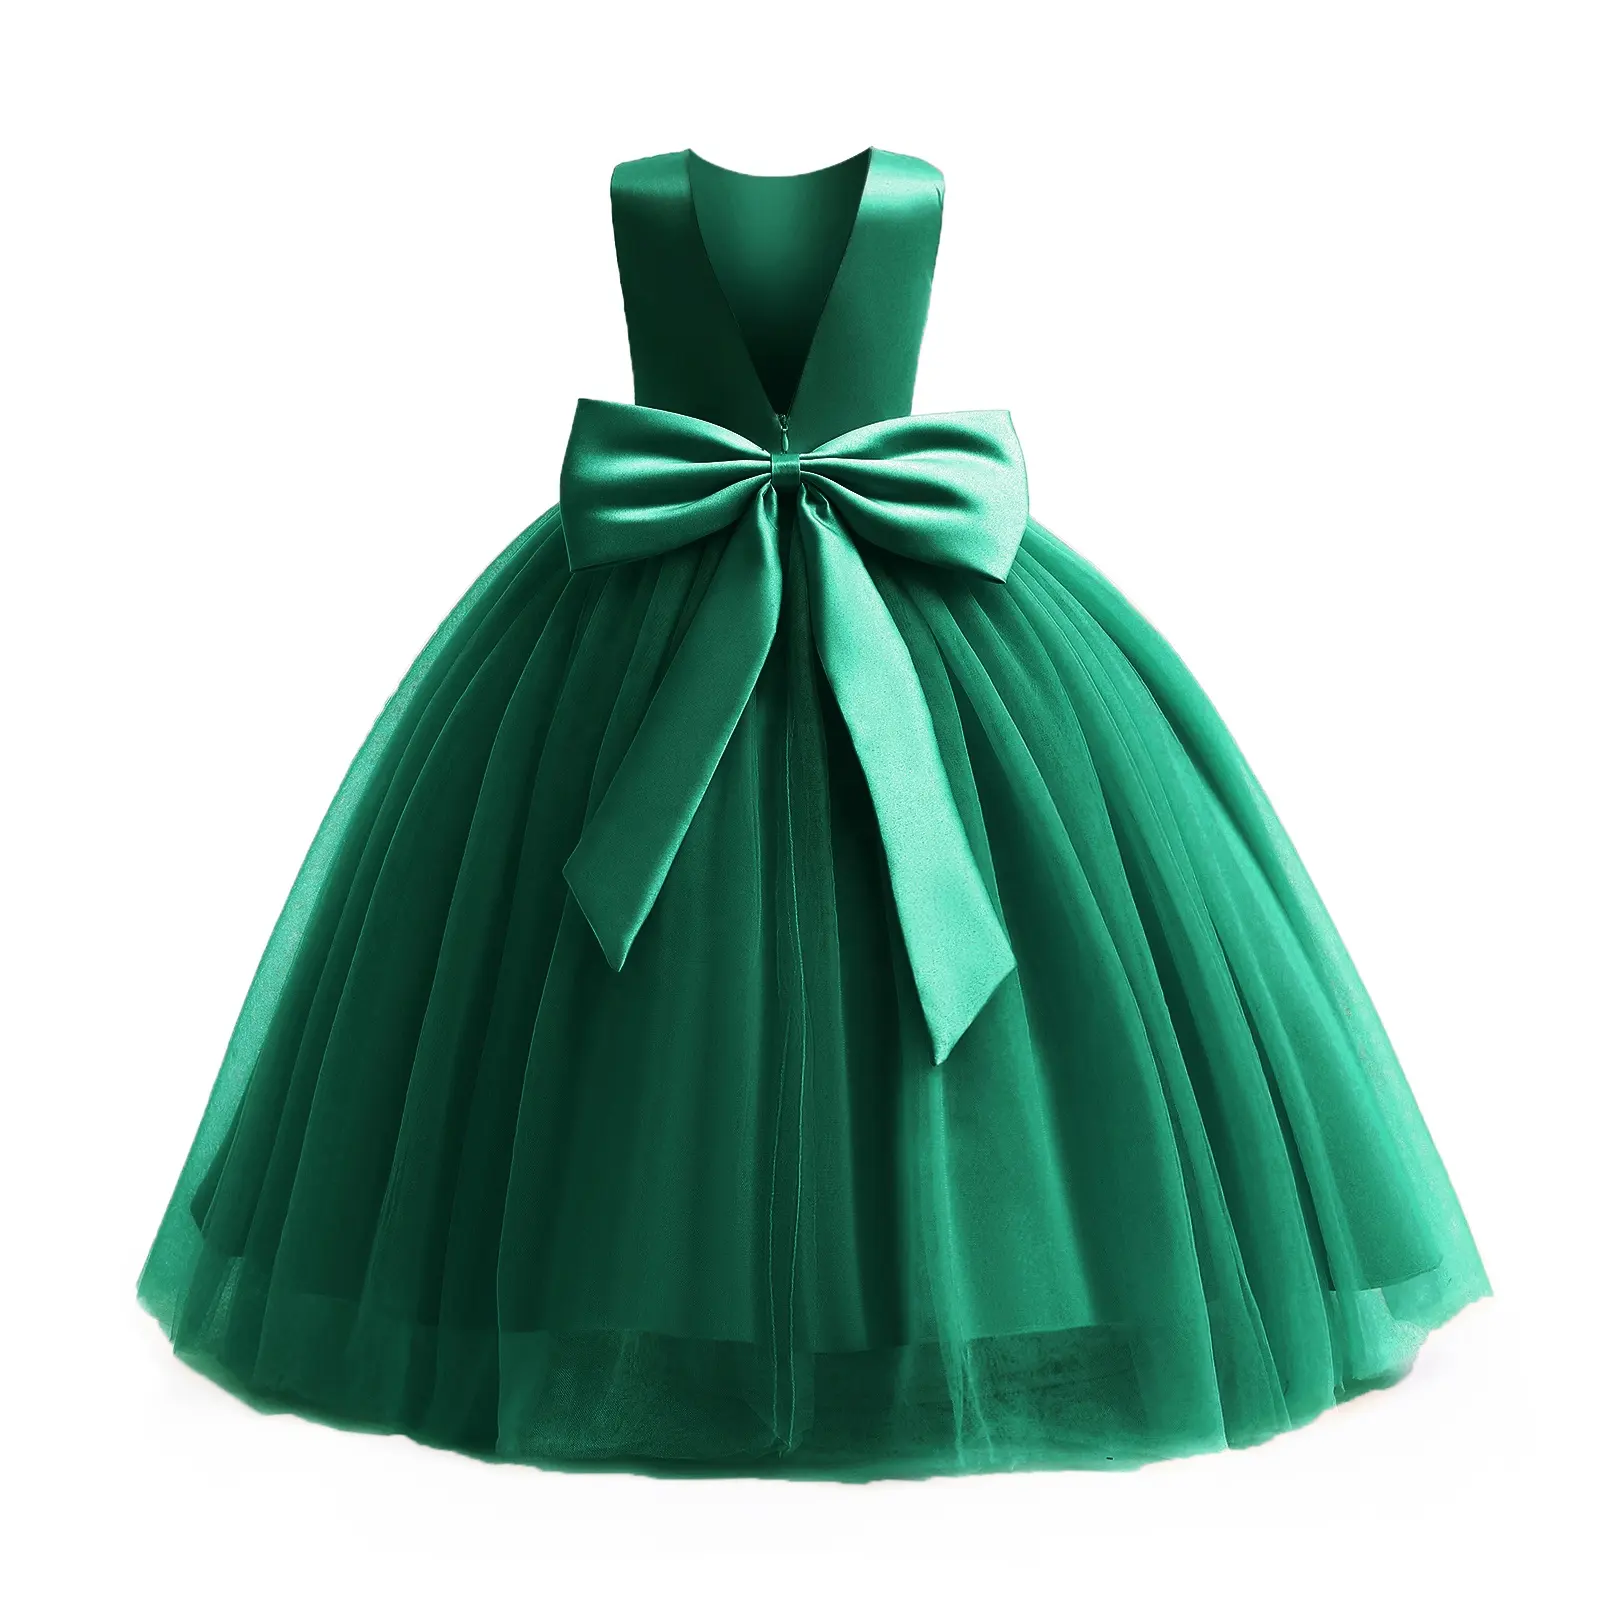 Luxury Satin Flower Girl Dress with Big Bow Sleeveless Fancy Formal Birthday Tulle Party Fashion Long Dresses for Teen Girls